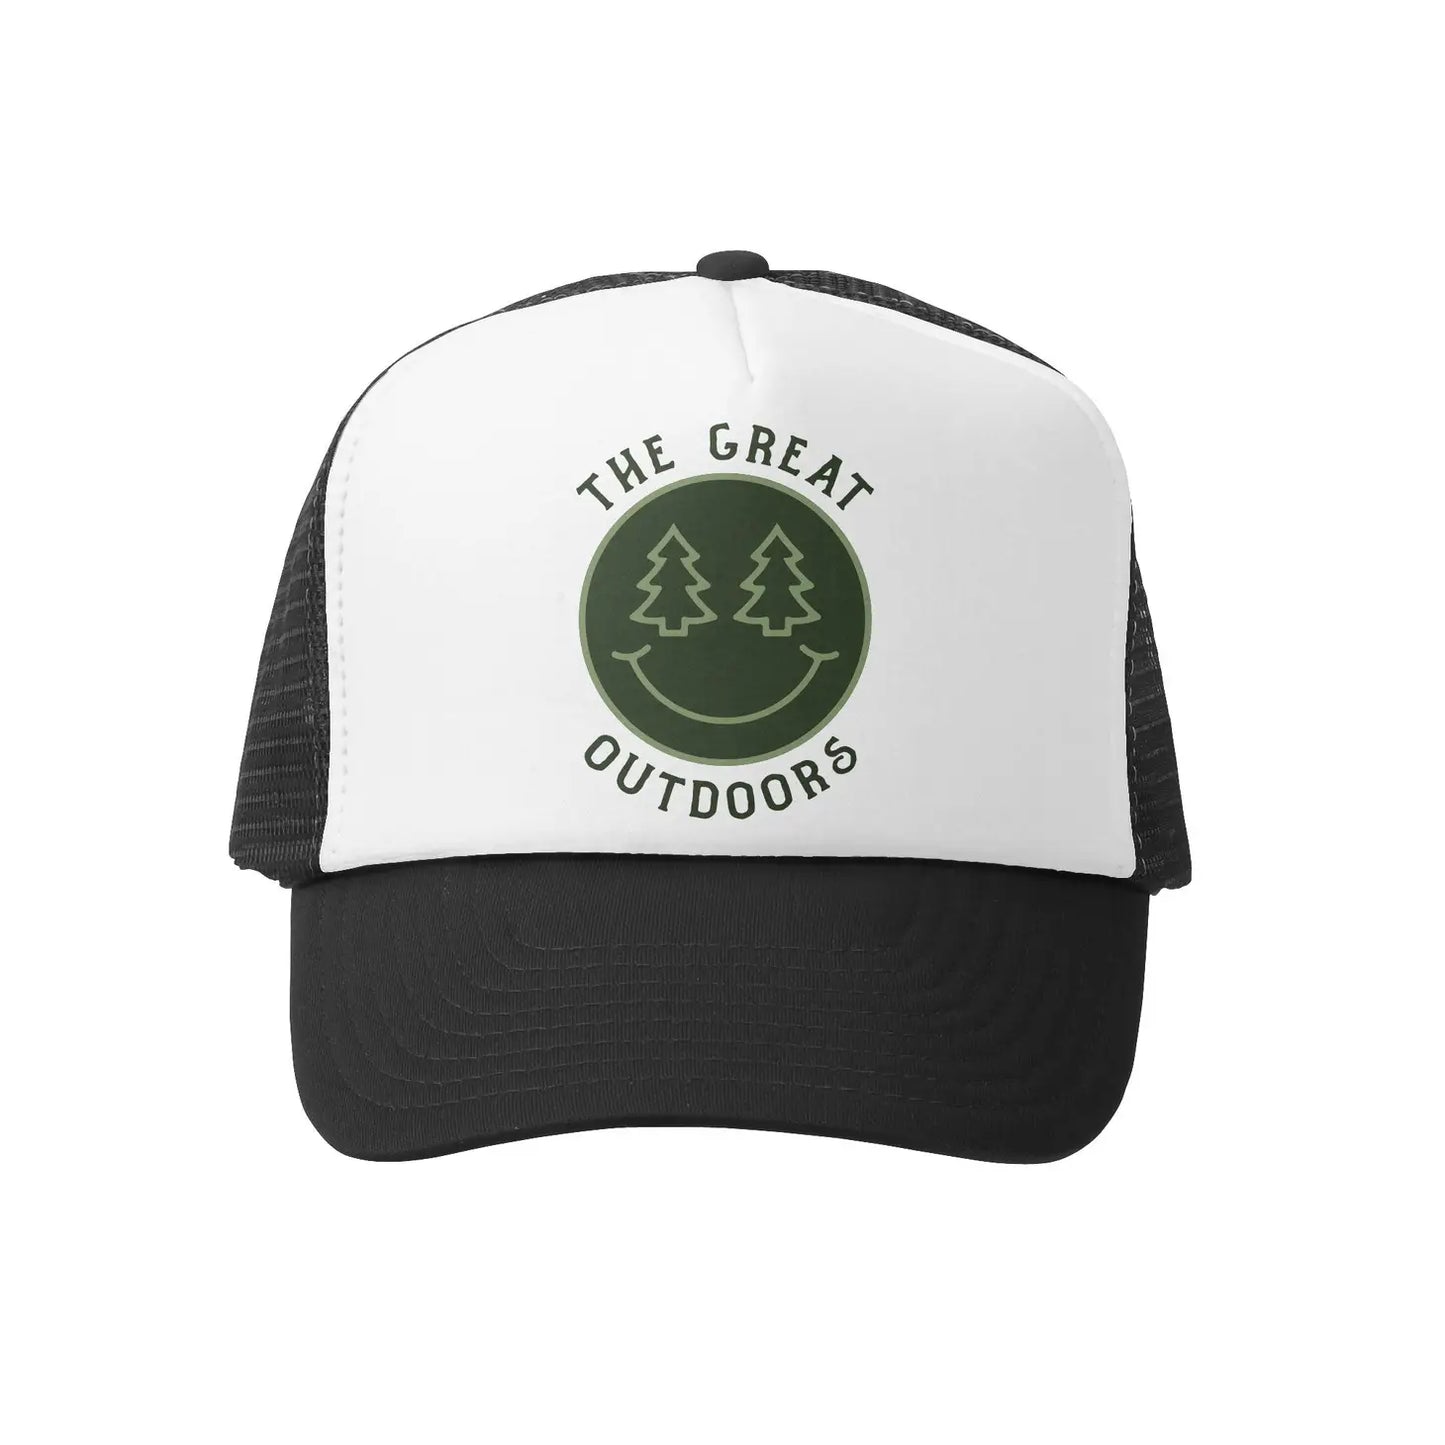 GREAT OUTDOORS youth hat